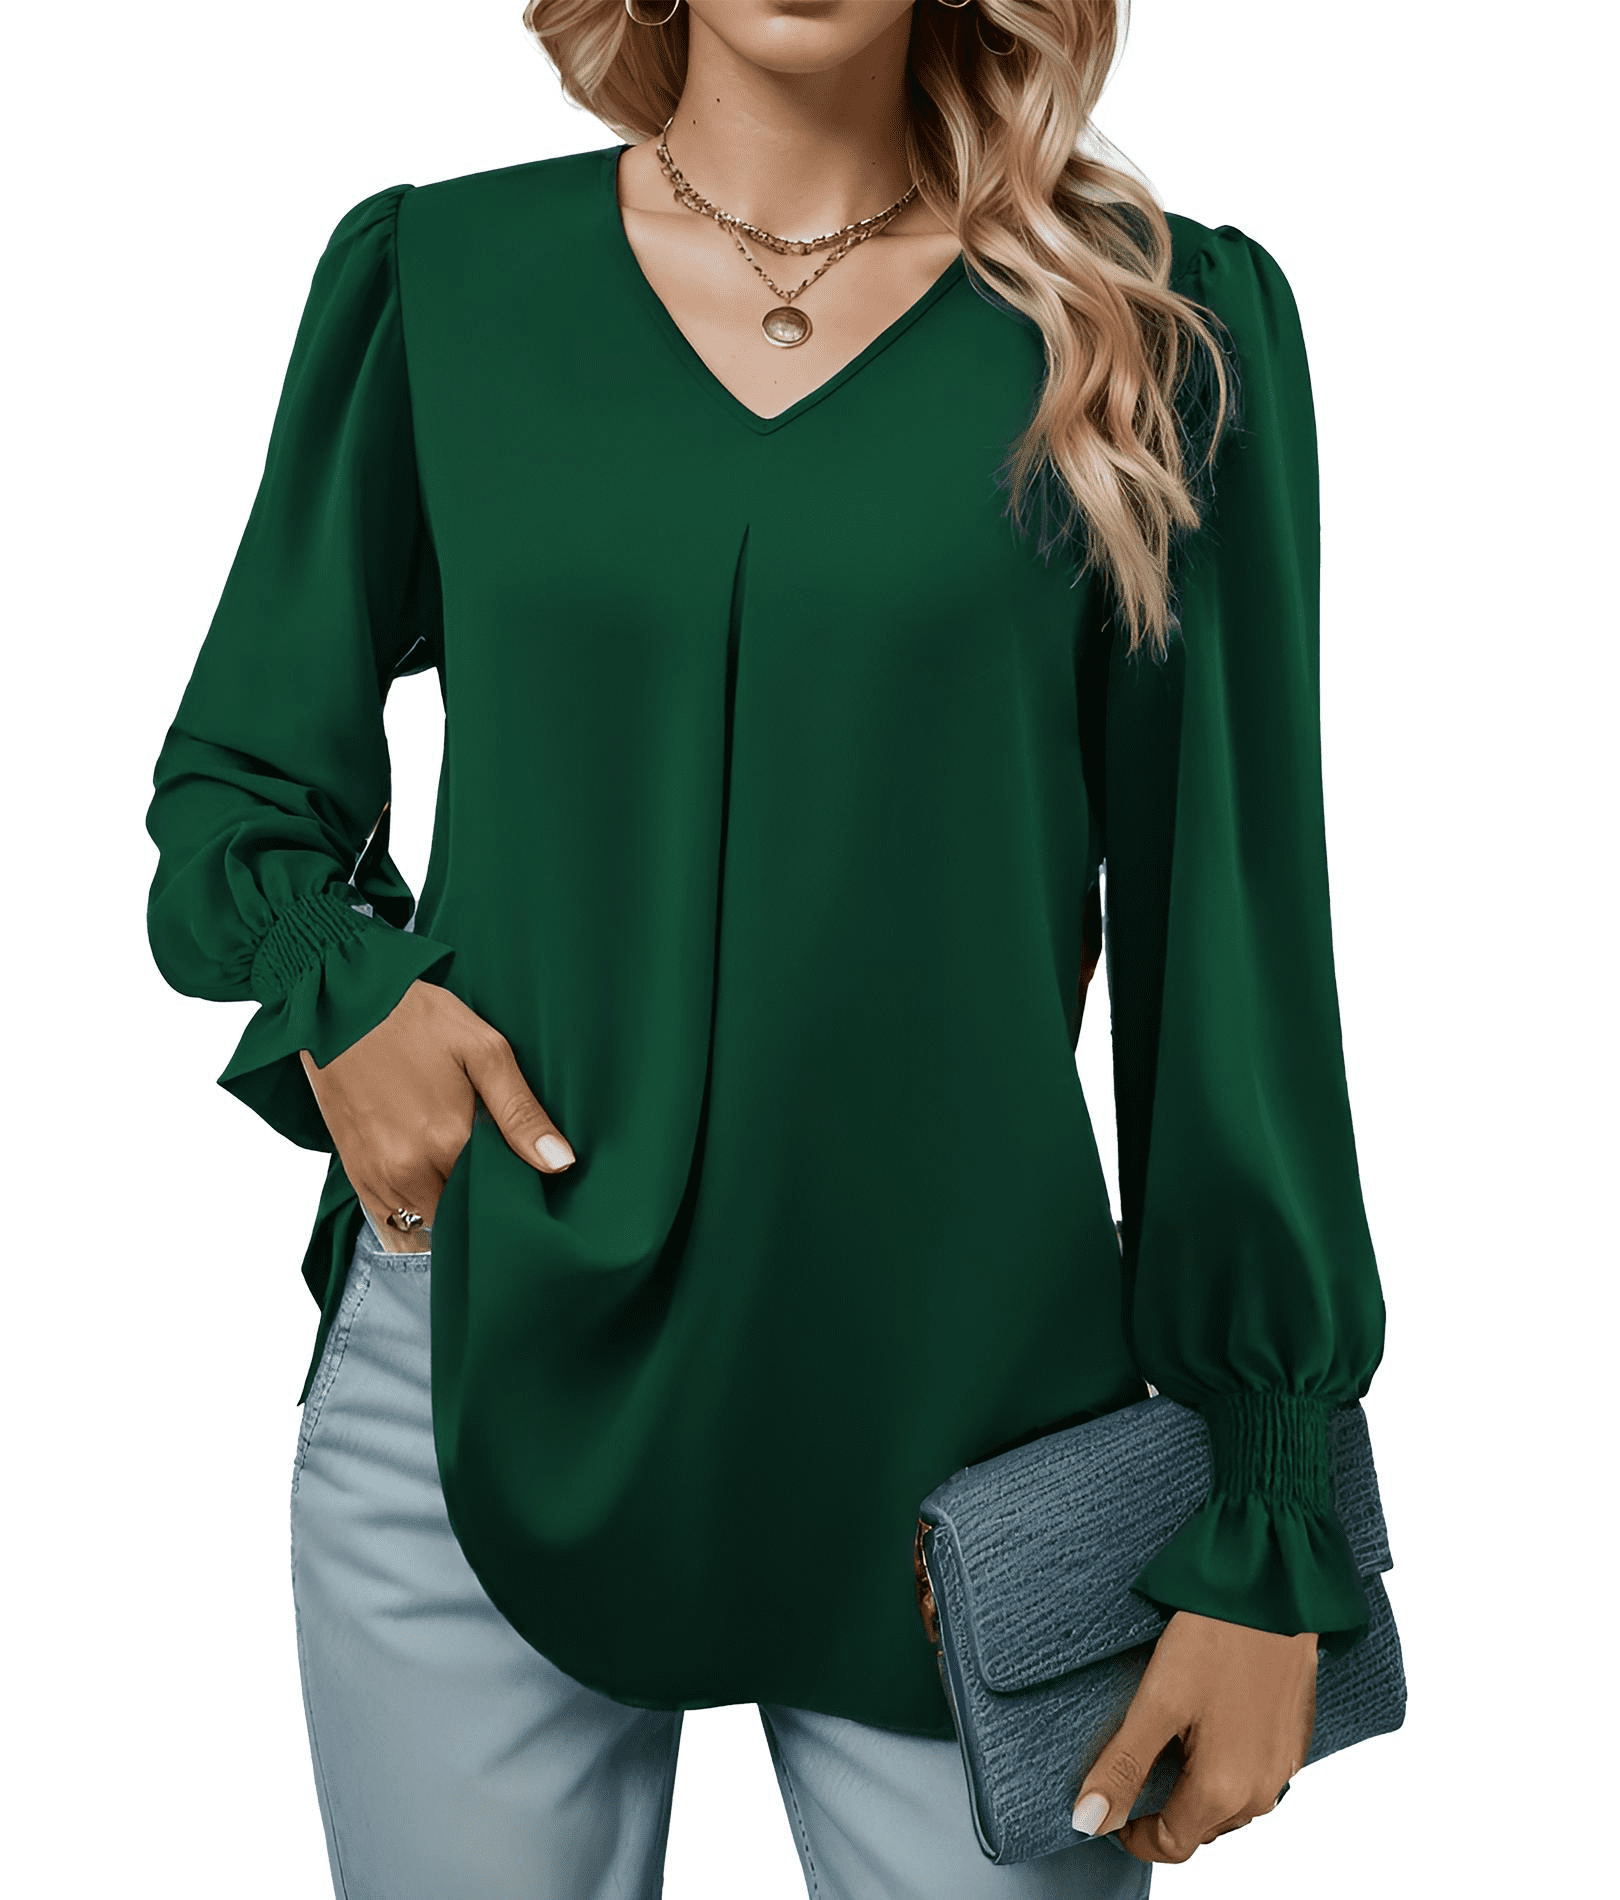 JWZUY Womens Chiffon Tops Long Sleeve Ruffle Collar V Neck Blouses  Button-Down Shirts for Work Business Casual T Shirts Army Green XL 